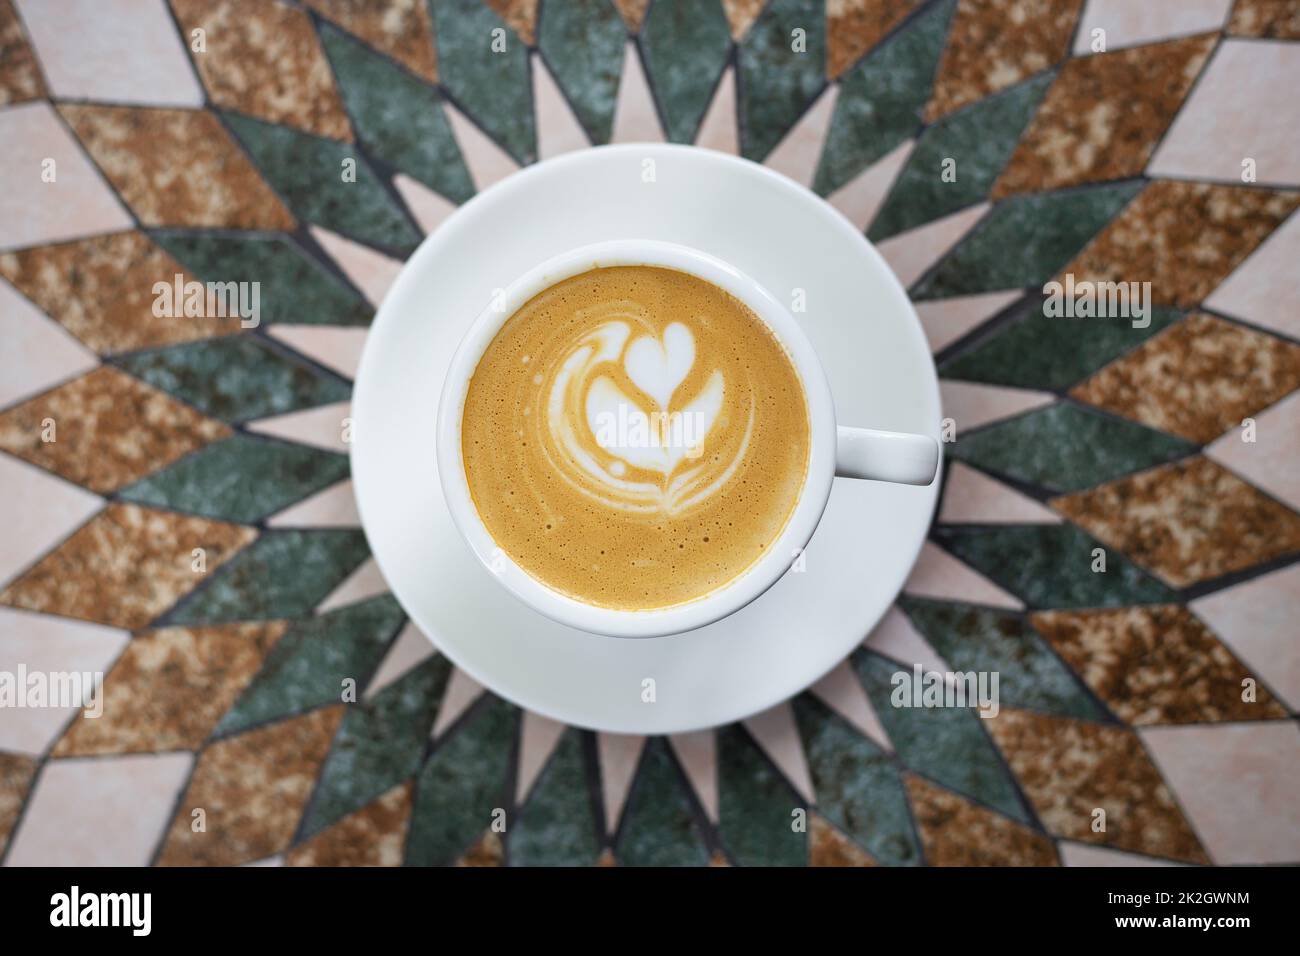 https://c8.alamy.com/comp/2K2GWNM/white-cup-of-cappuccino-coffee-with-heart-shaped-foam-on-a-beautiful-table-view-from-above-2K2GWNM.jpg